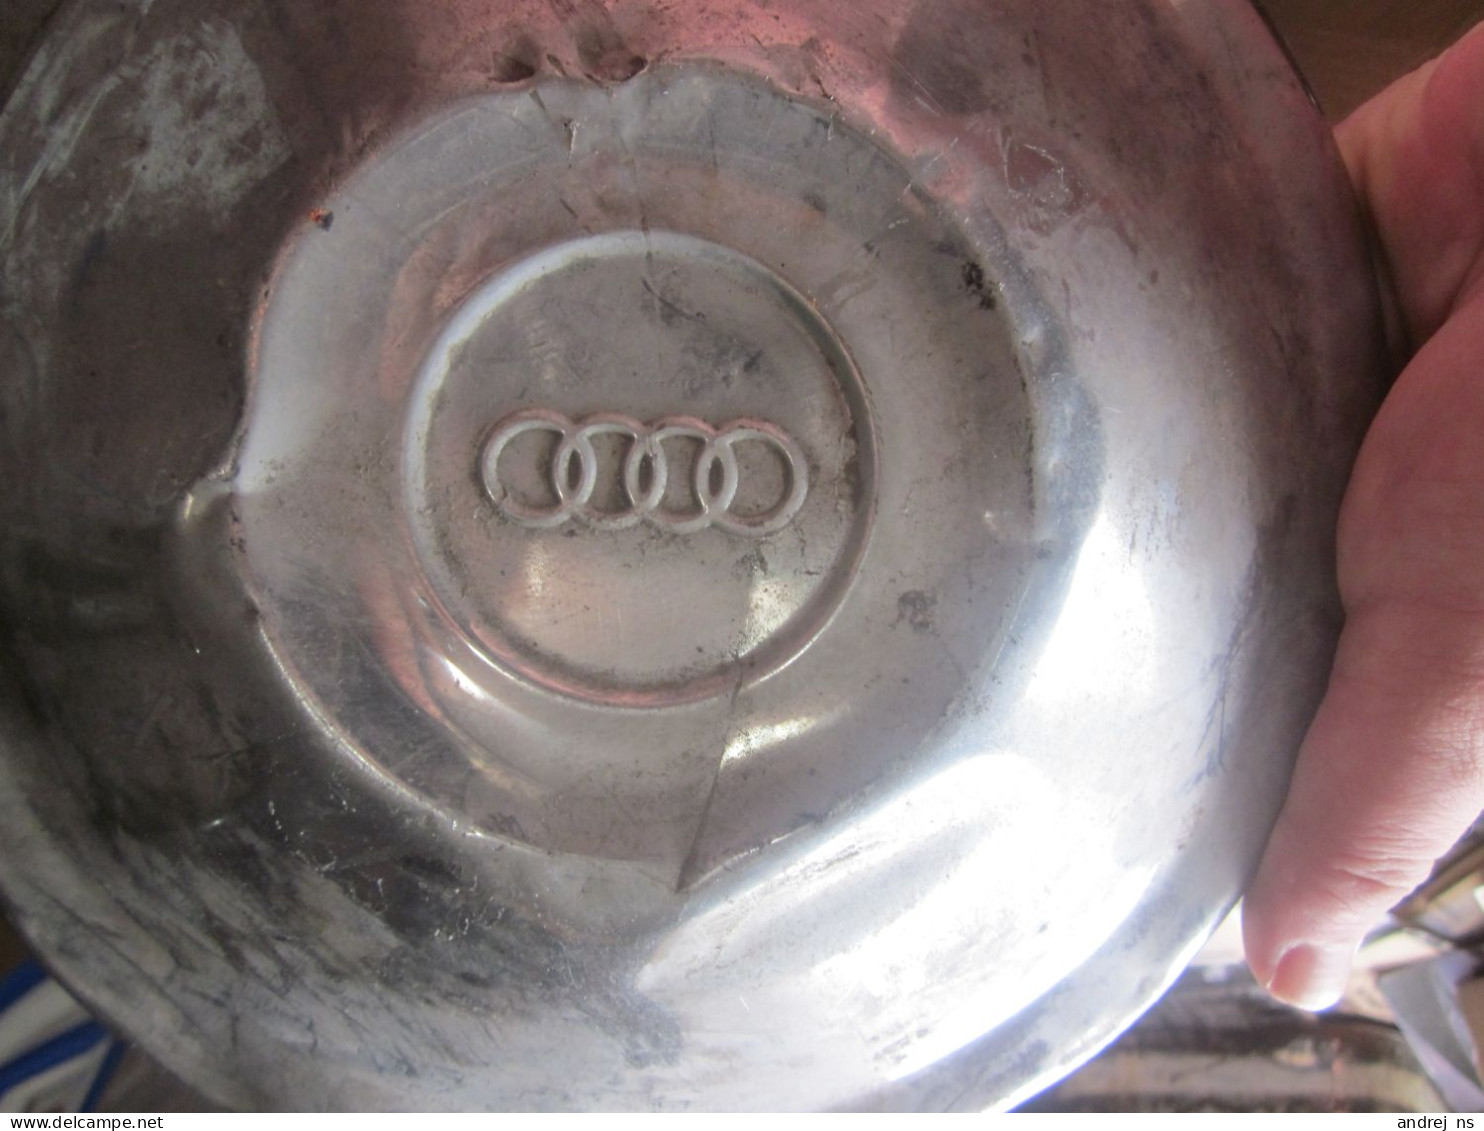 Audi, Old Wheel Cap From An Audi Car - Voitures